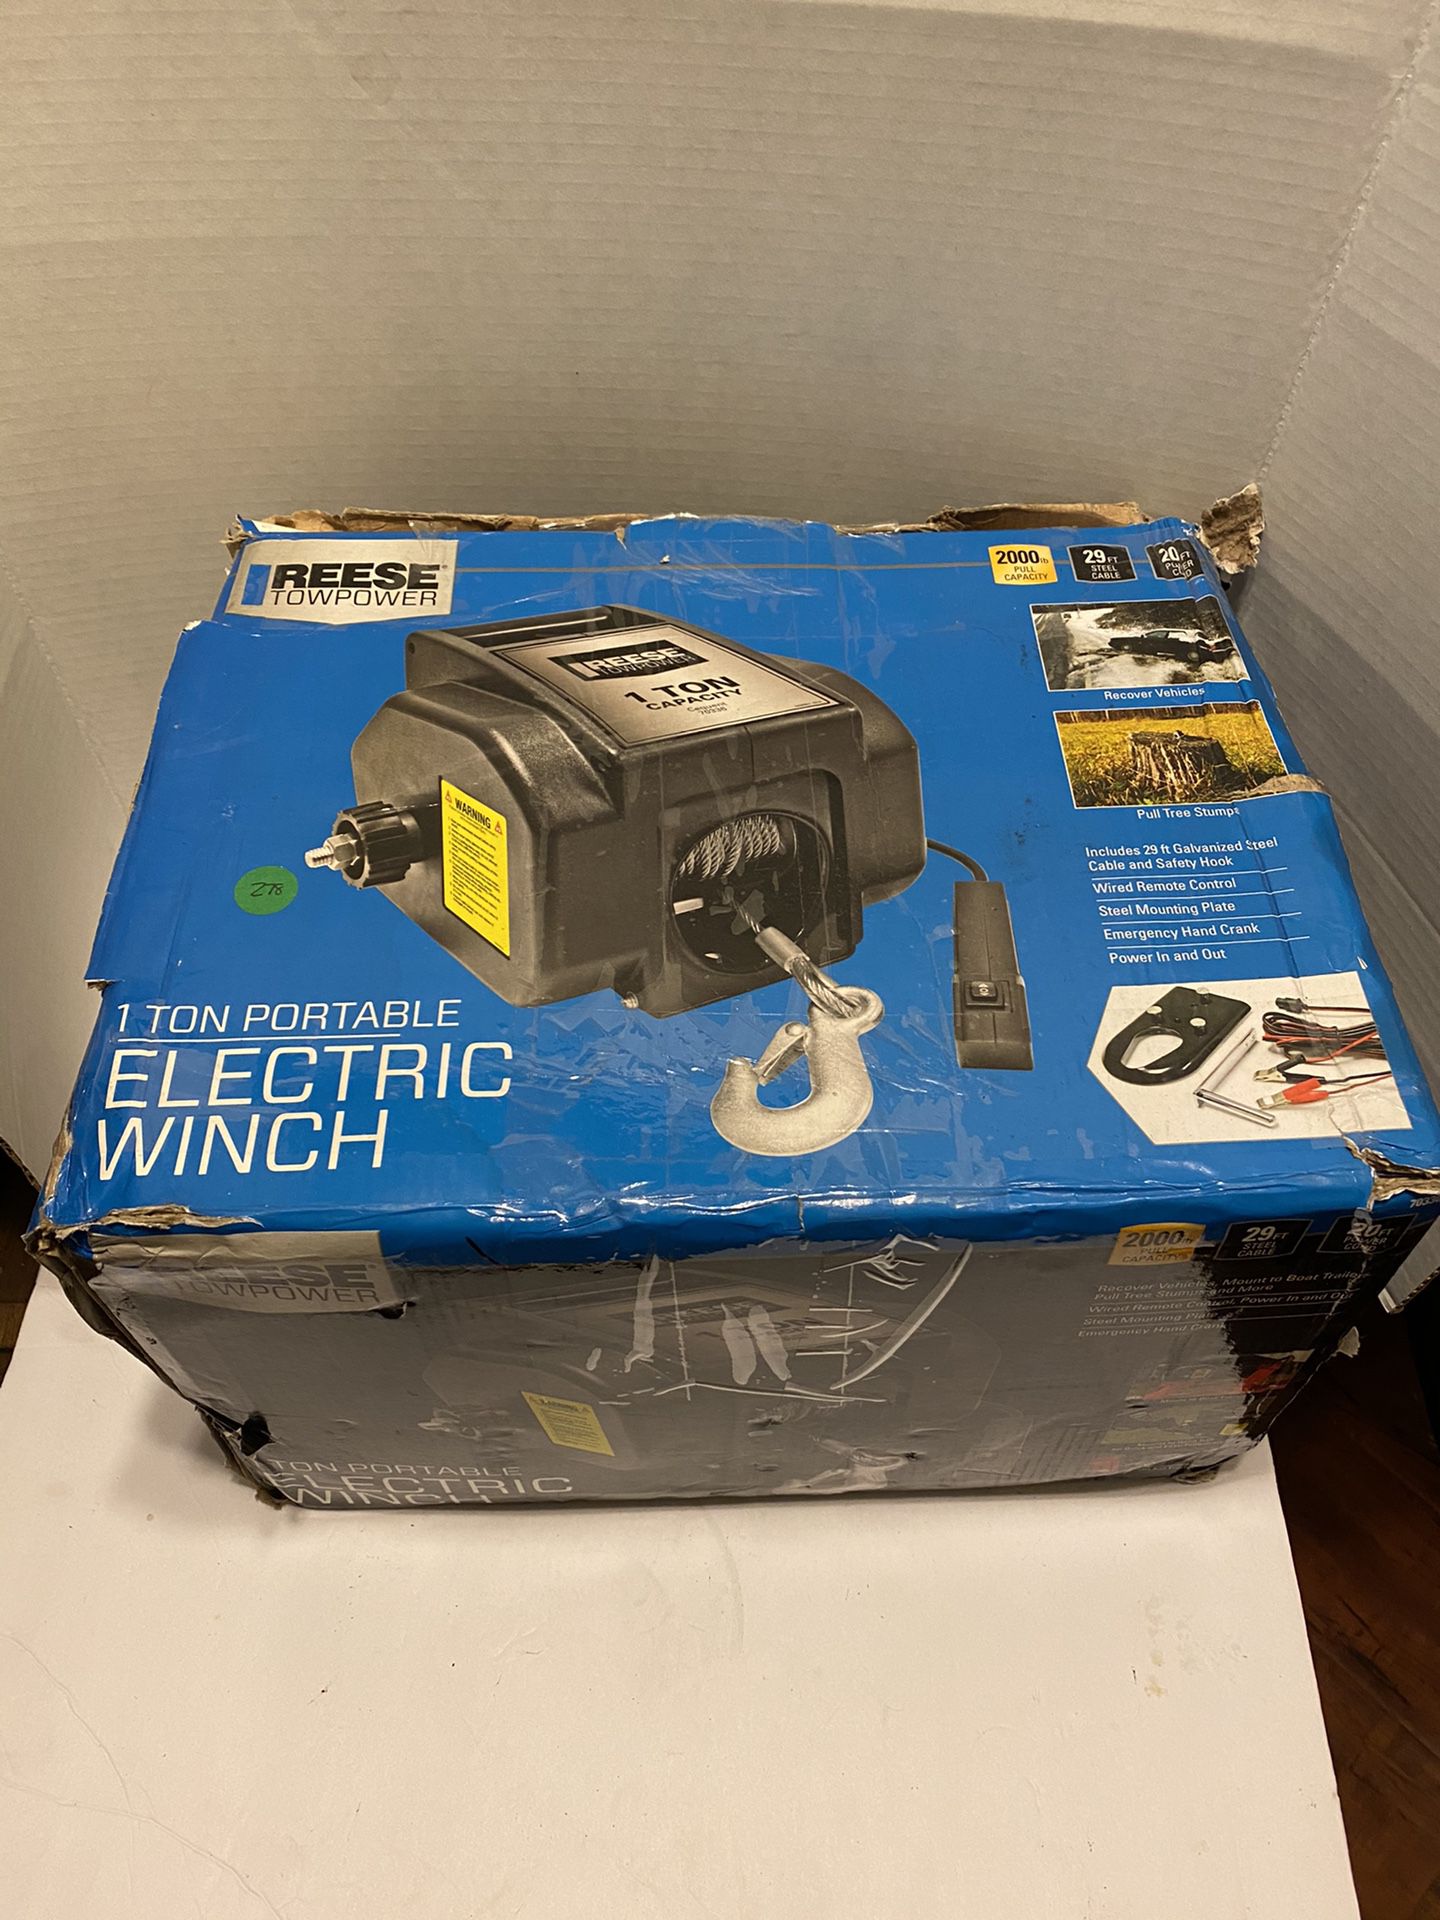 Reese Towpower 70336 1-Ton Portable Electric Winch